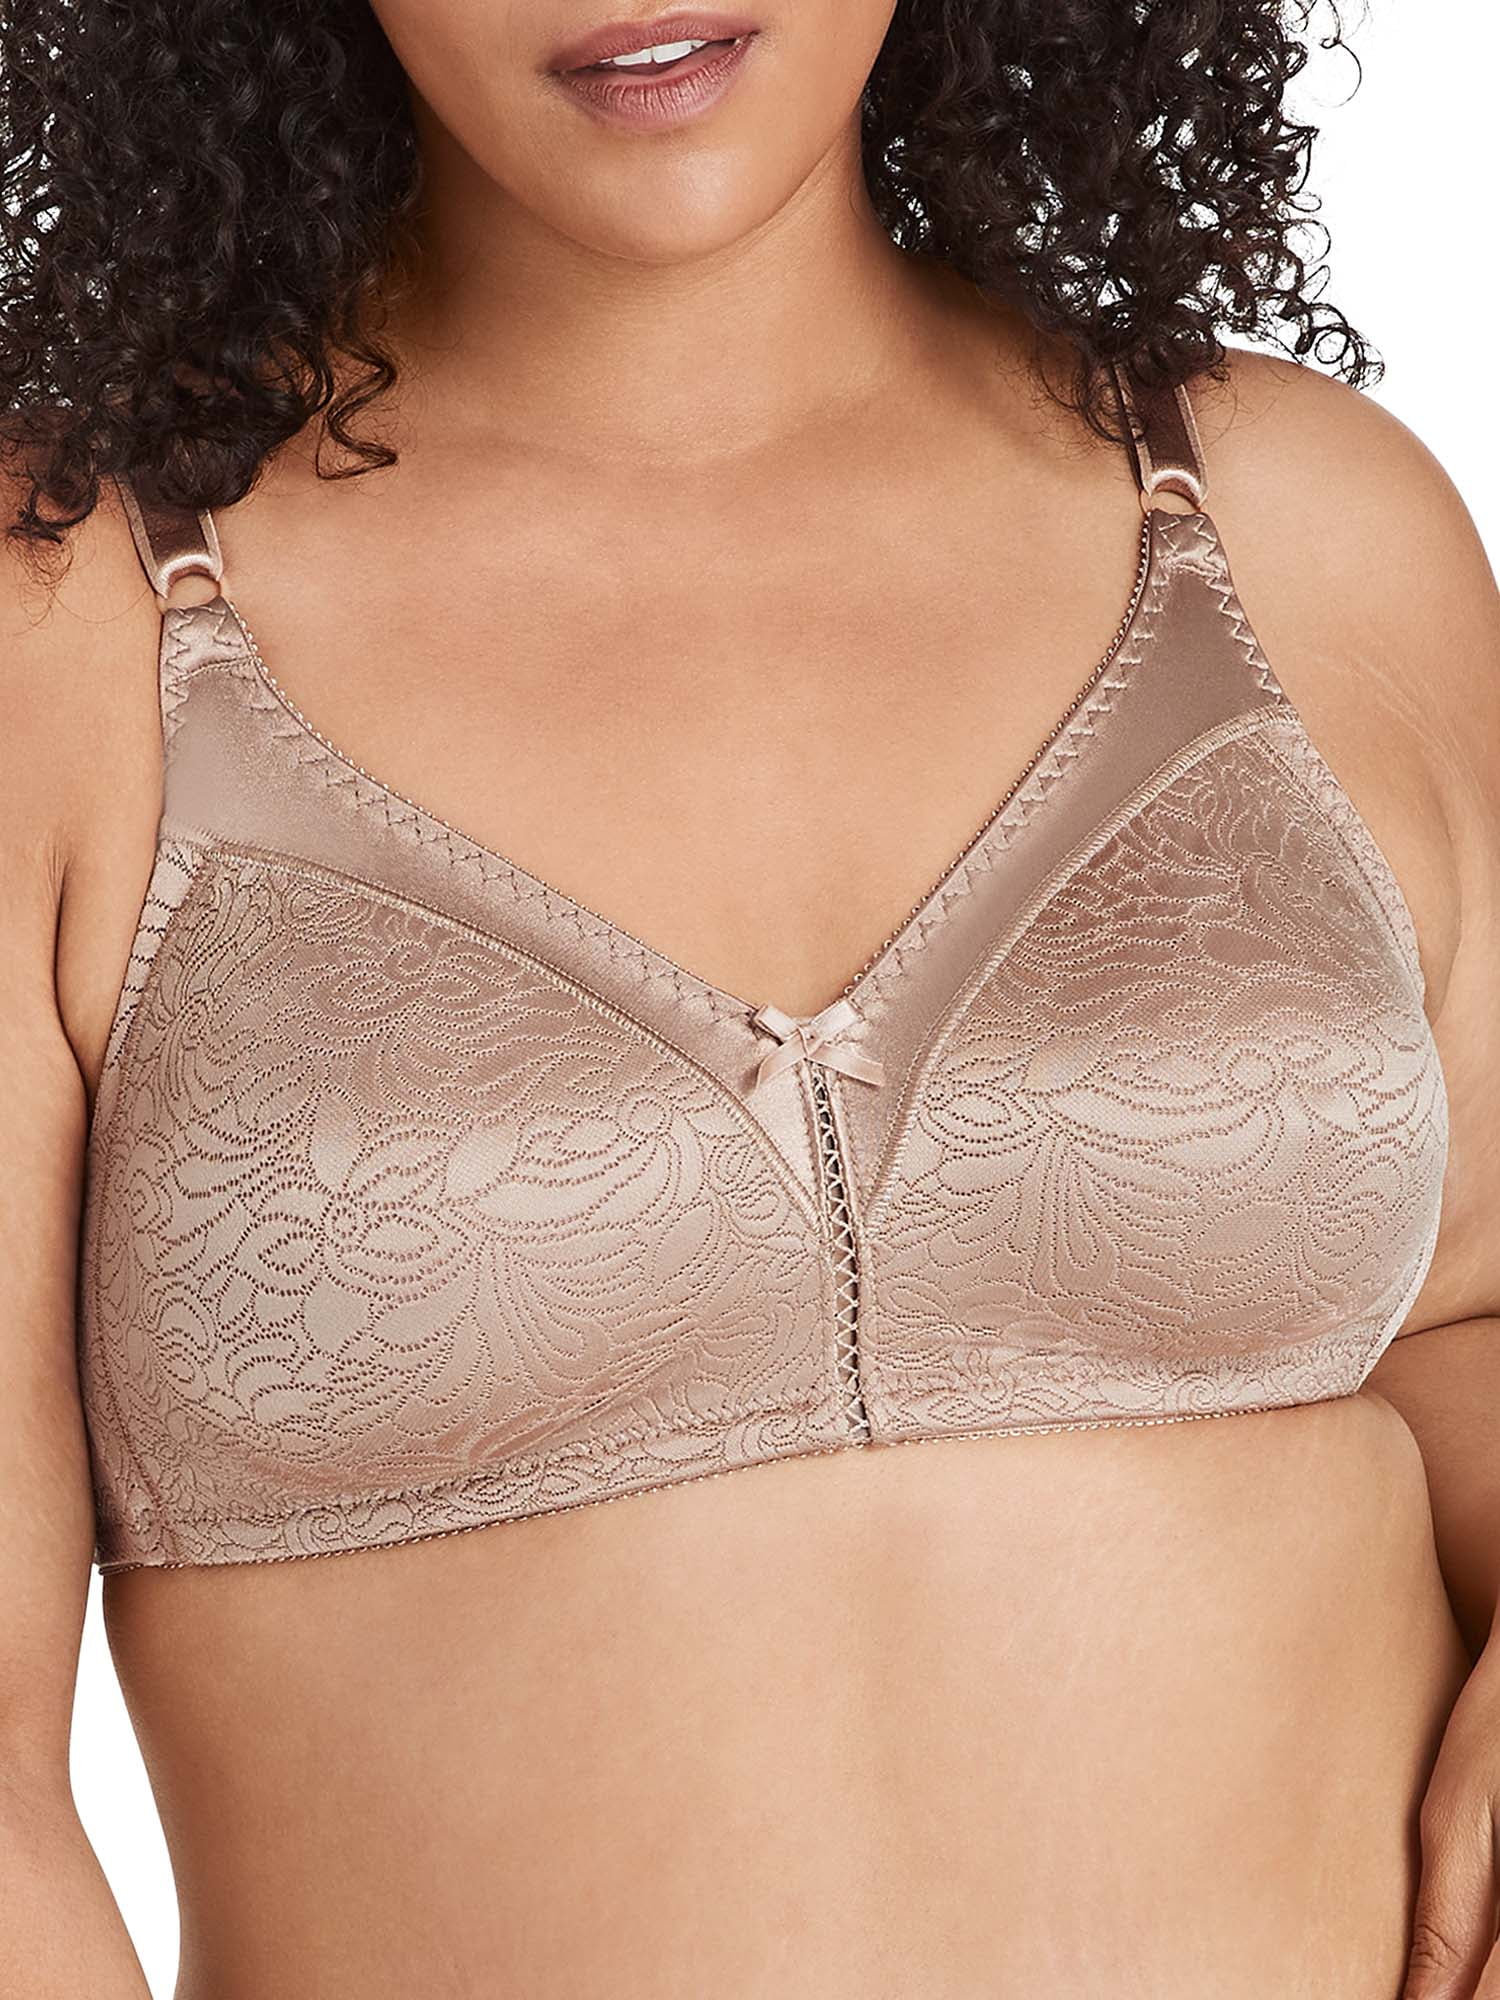 Bali Women's Double Support Lace Wirefree Bra at  Women's Clothing  store